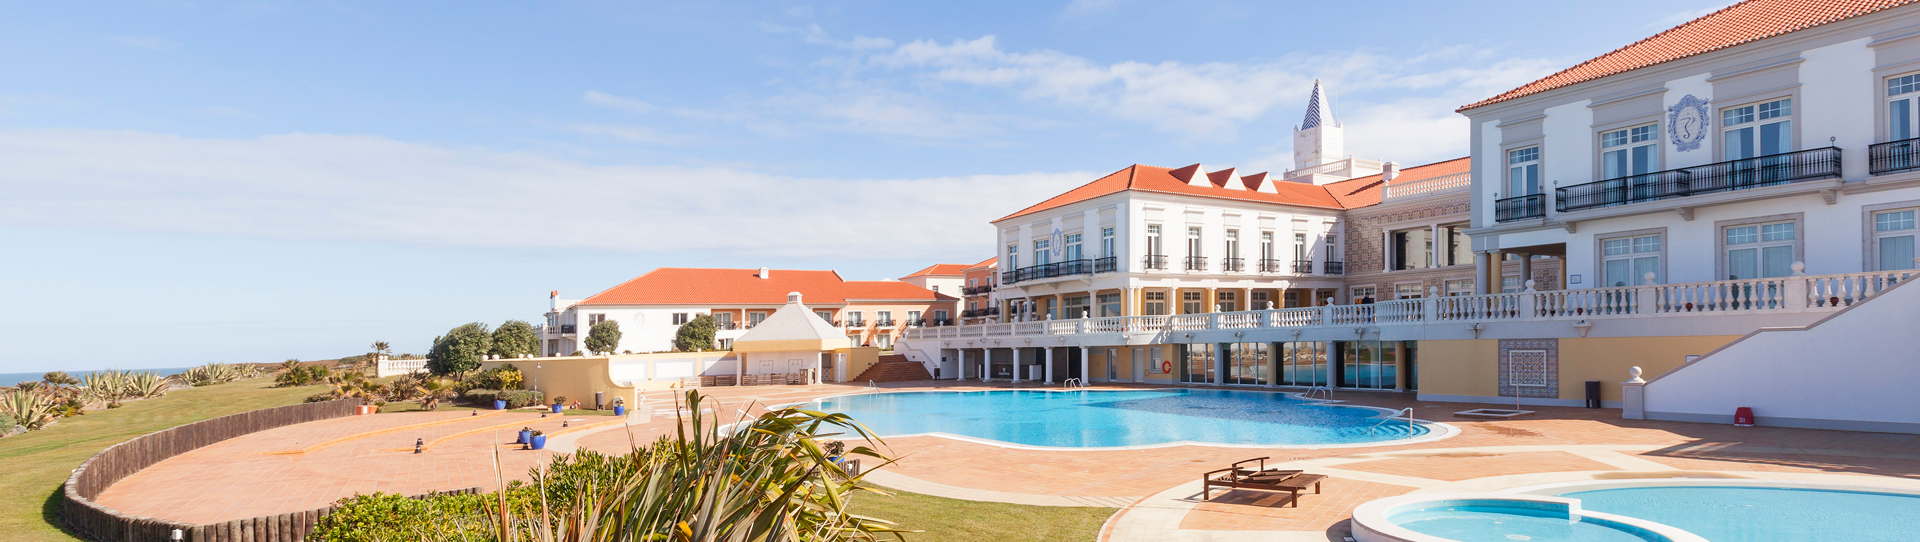 Portugal golf holidays - 7 nights BB & 5 Golf Rounds<br>Silver Coast Golf Package - Photo 1